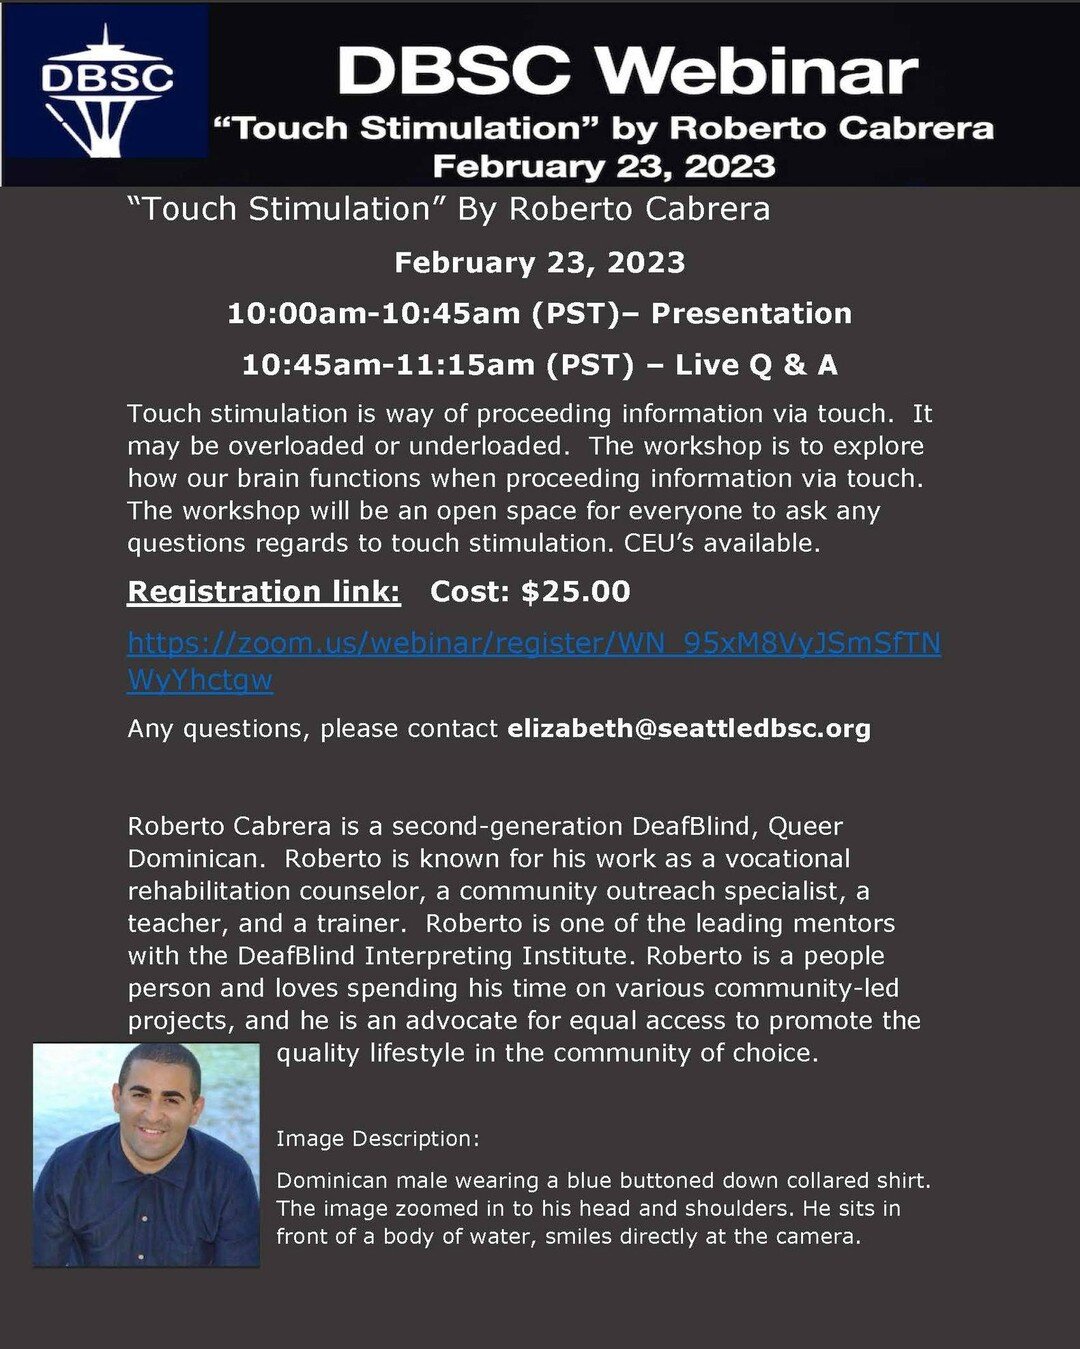 DBSC is hosting a webinar of &quot;Touch Stimulation&quot; by Roberto Cabrera. You won't want to miss this. 

Questions: email elizabeth@seattledbsc.org